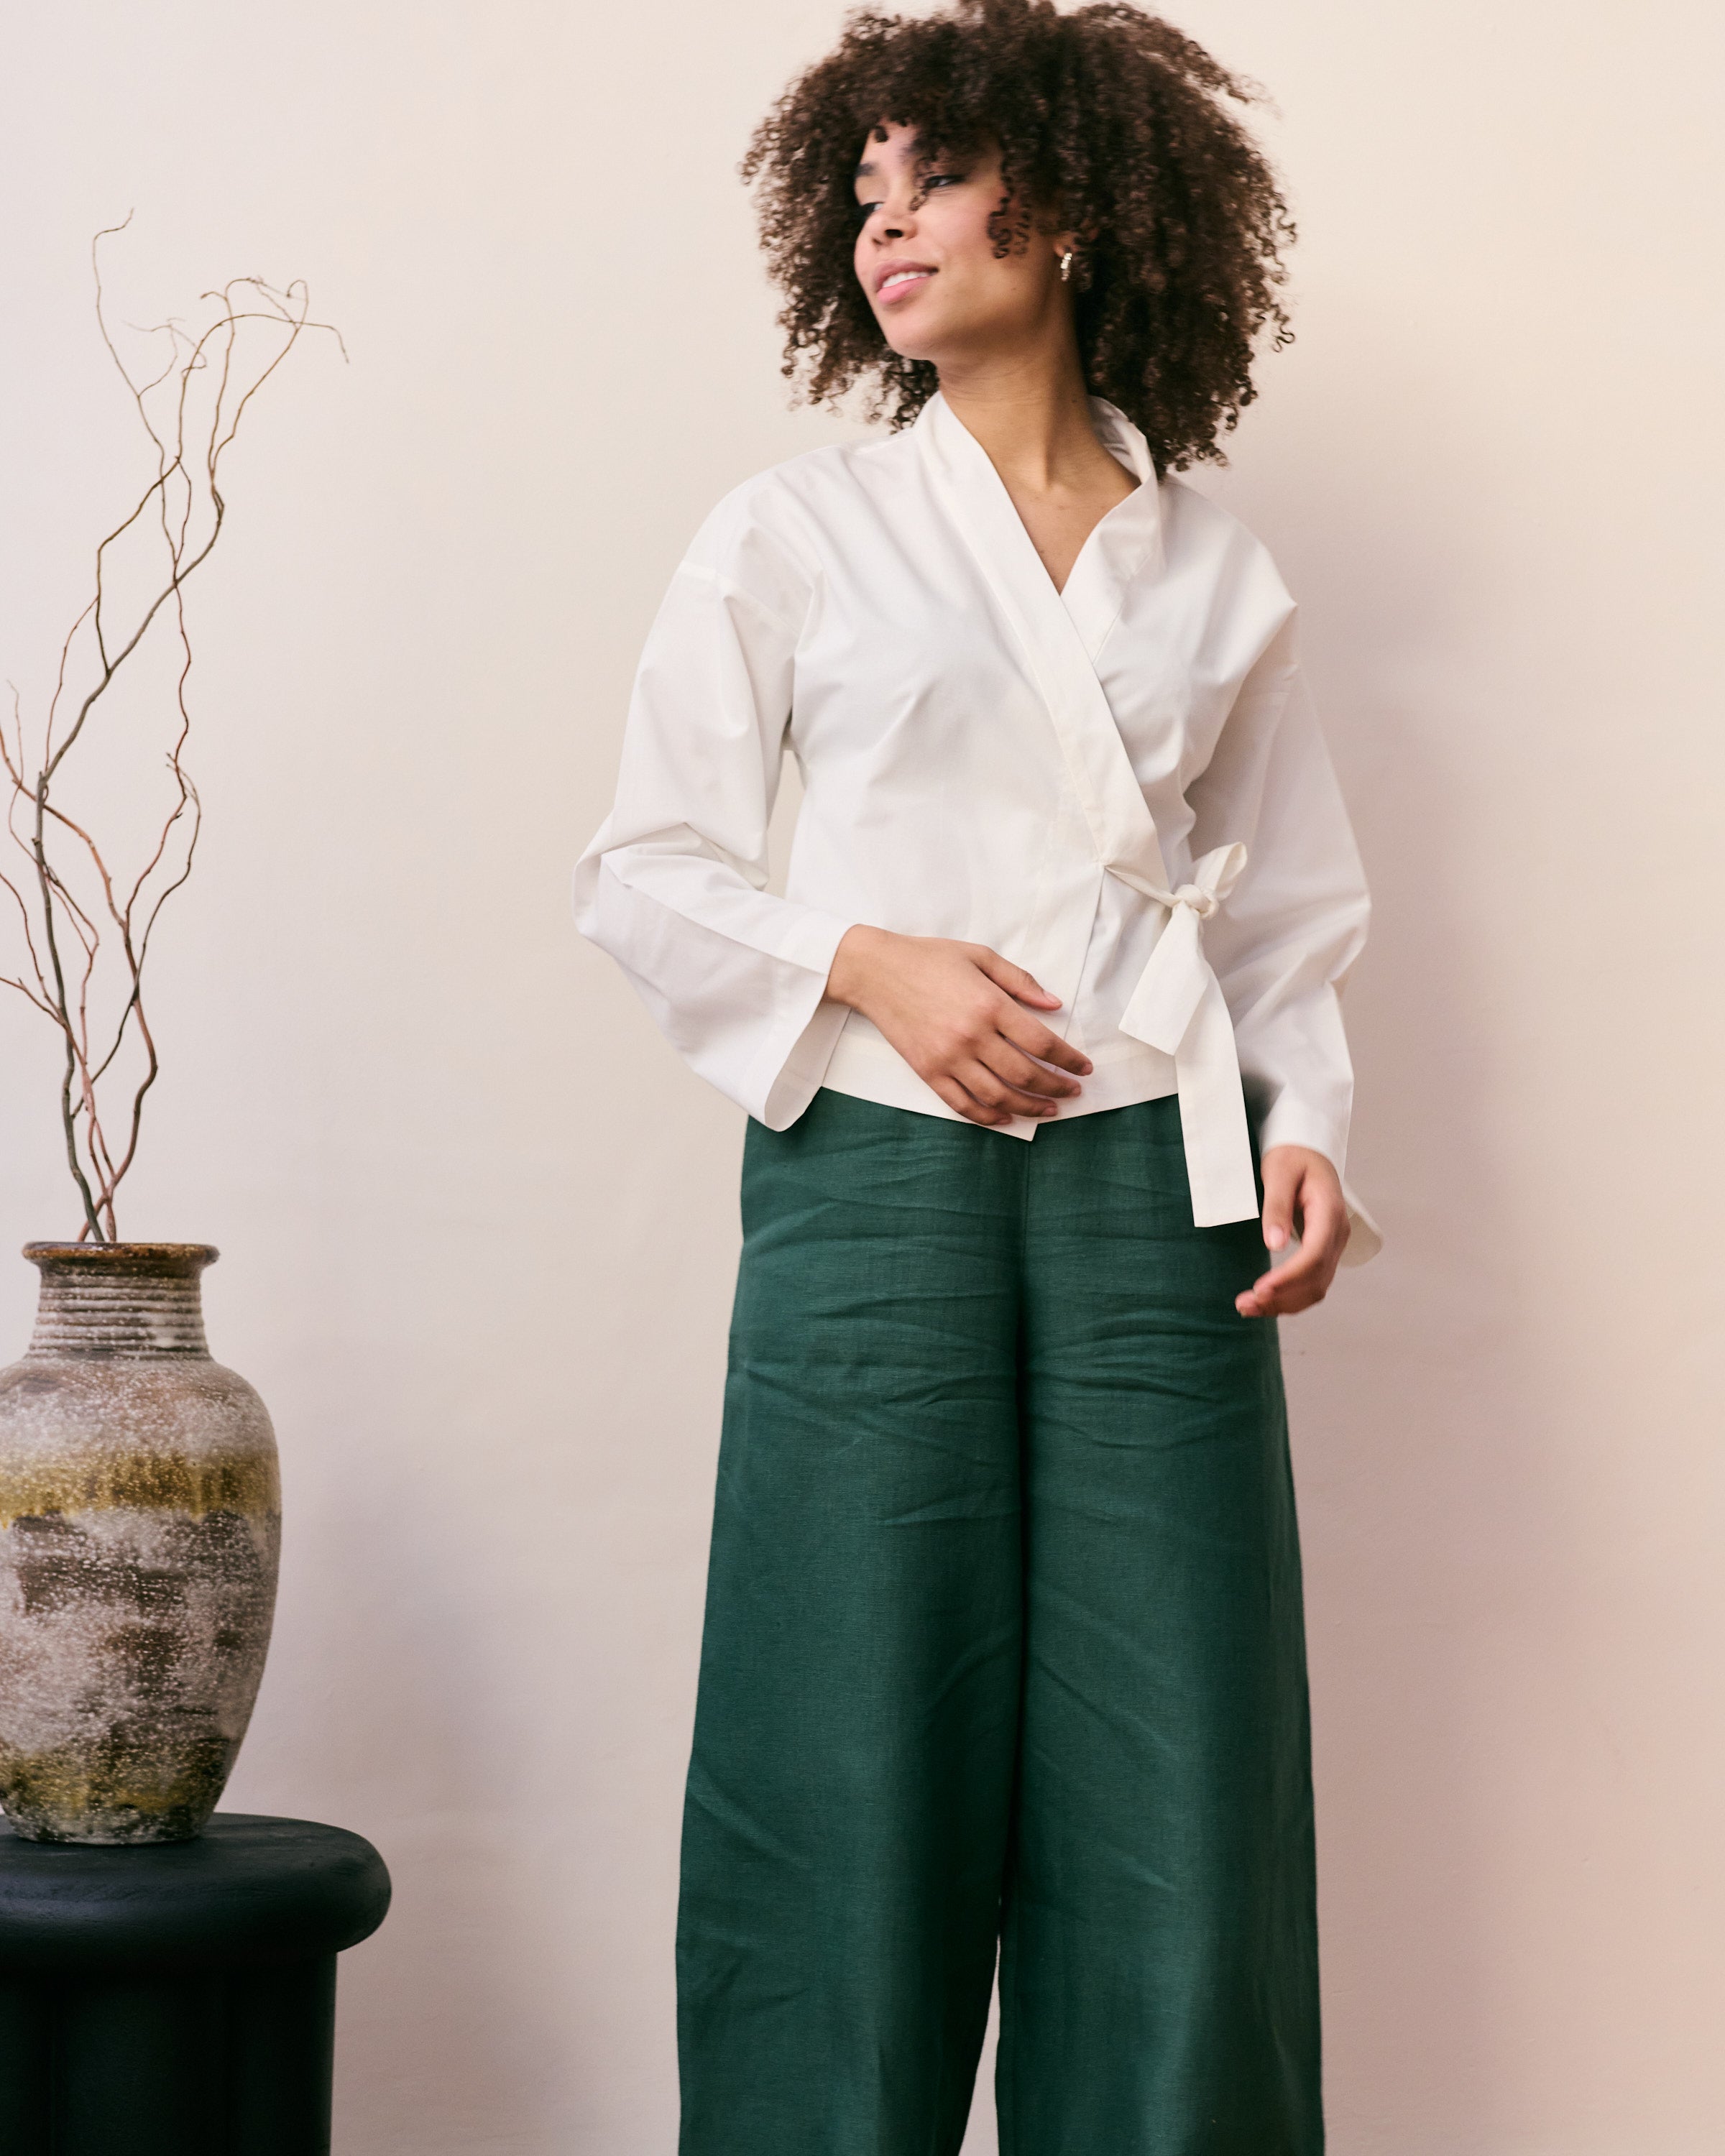 Girl in mana loa white cotton blouse and green linen pants.